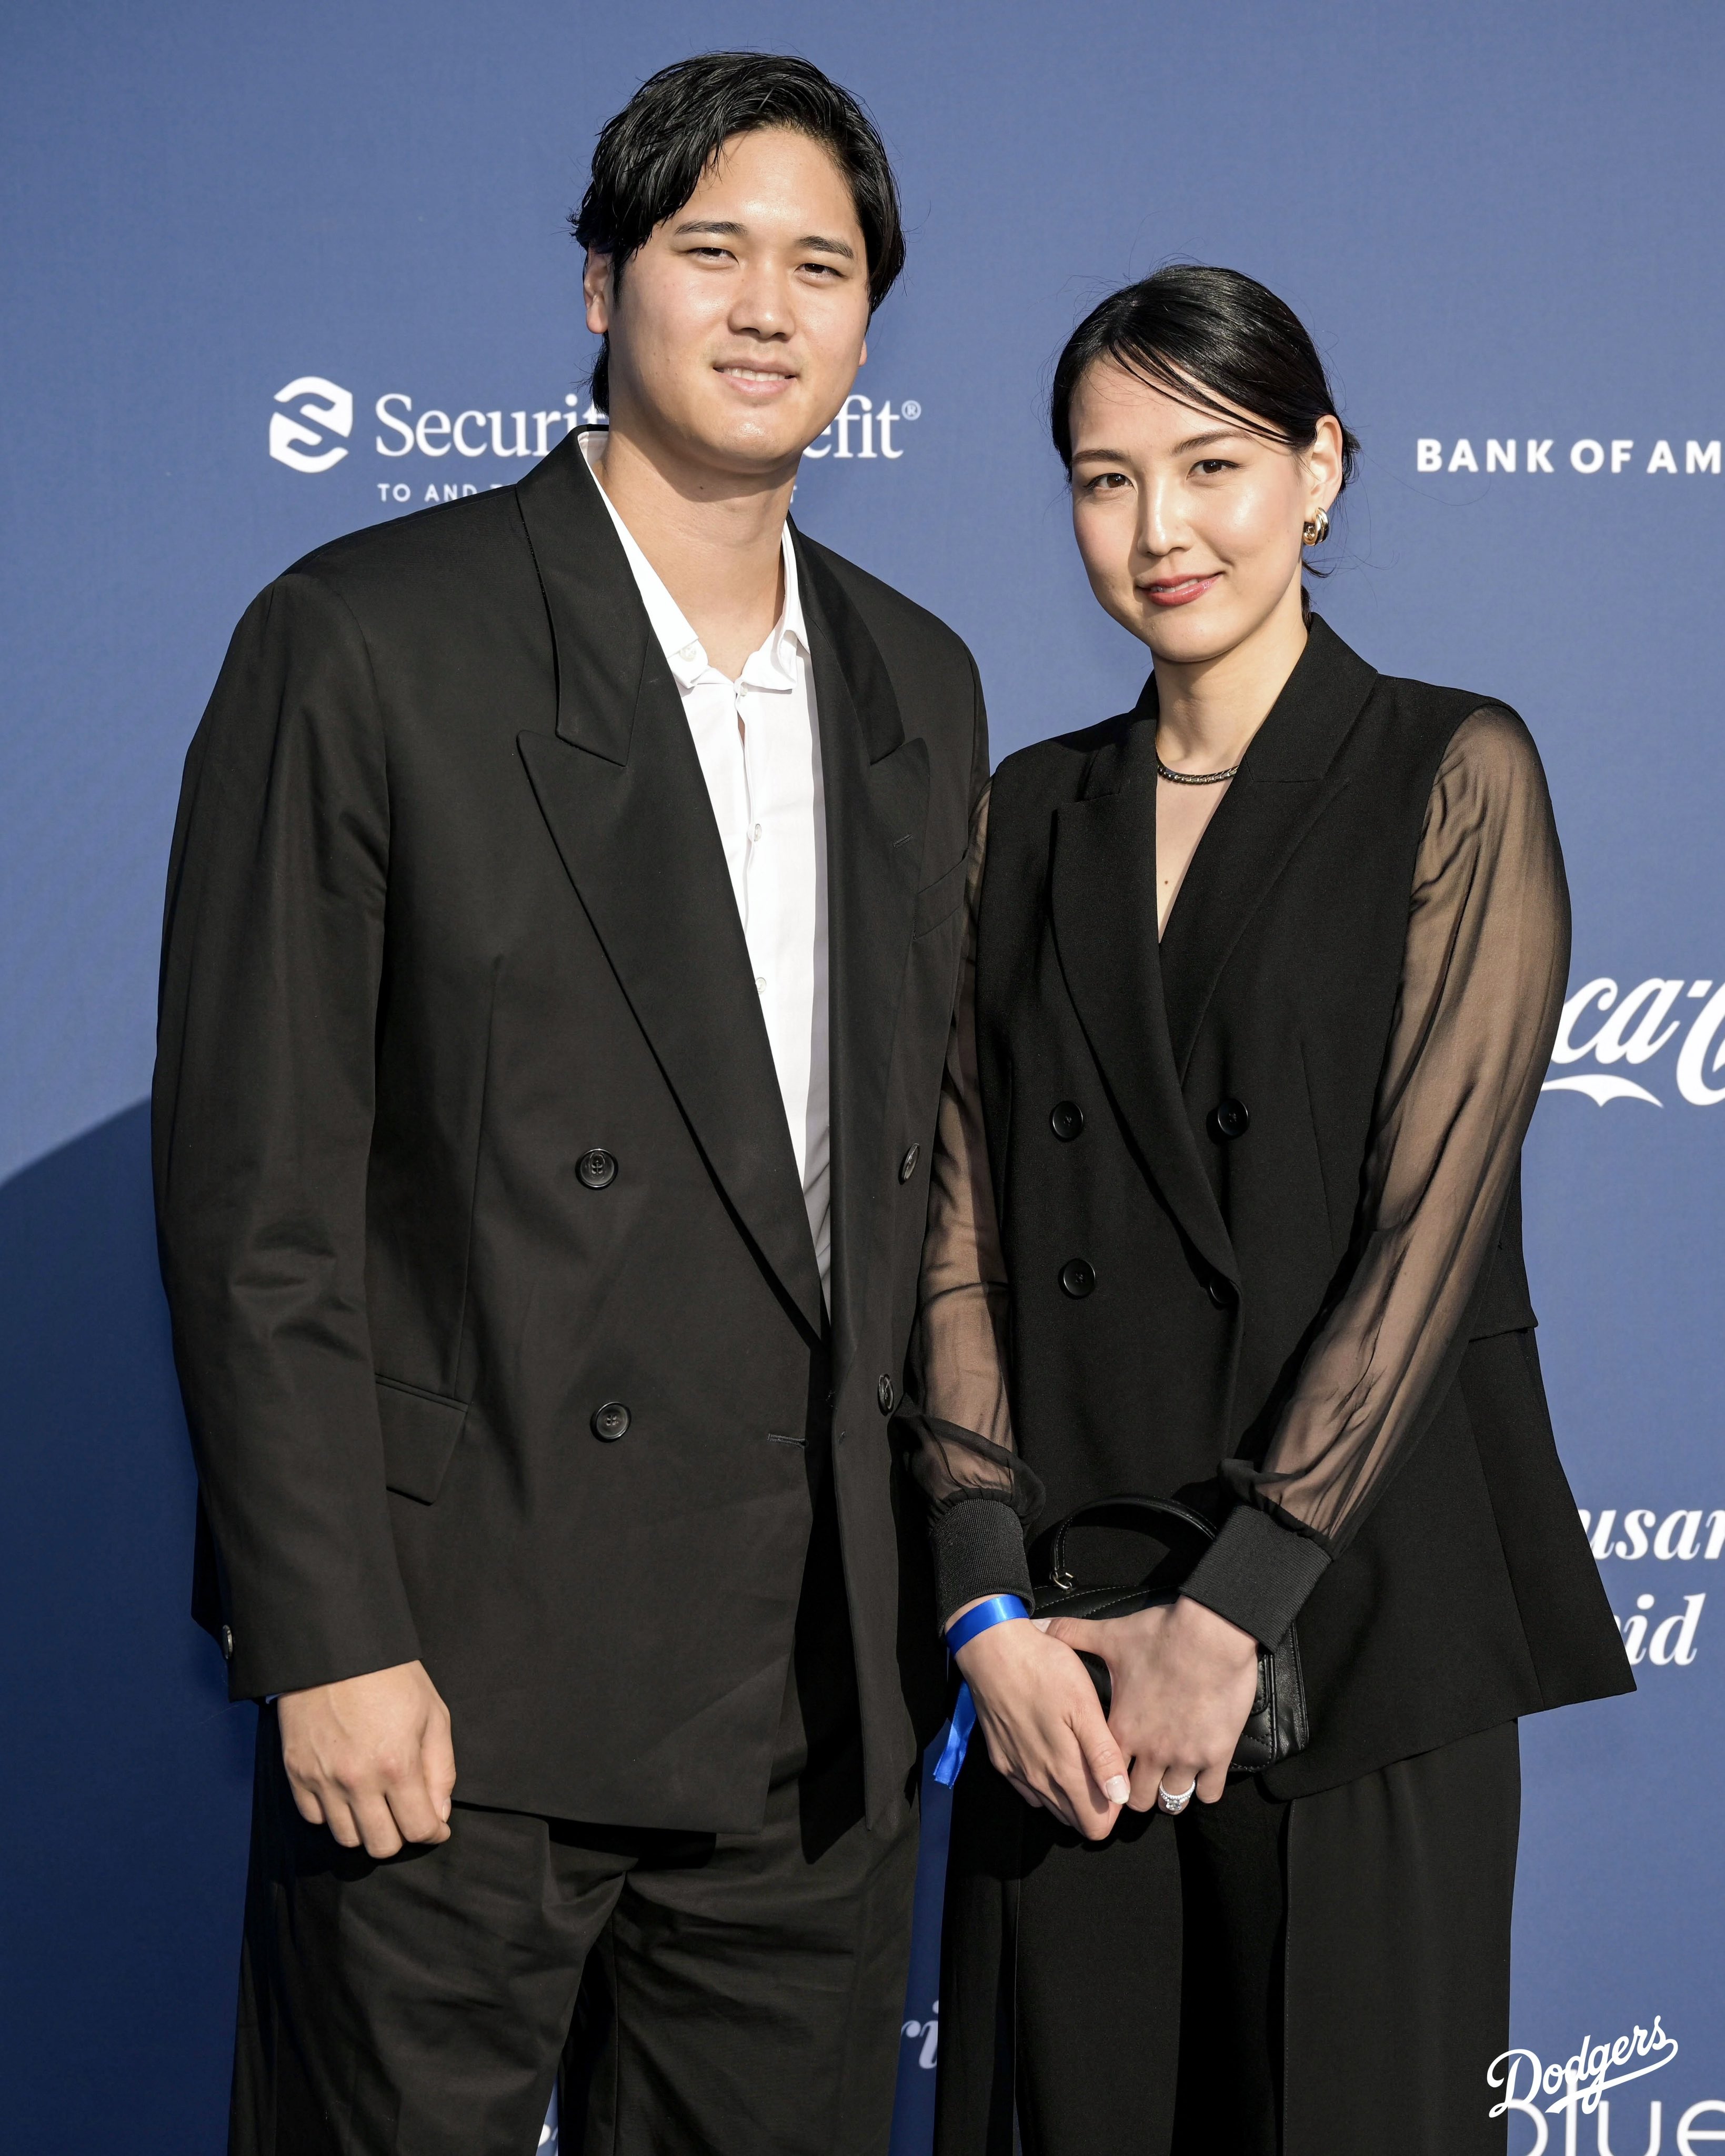 Shohei Ohtani and his wife Mamiko pose for a photo on the blue carpet.